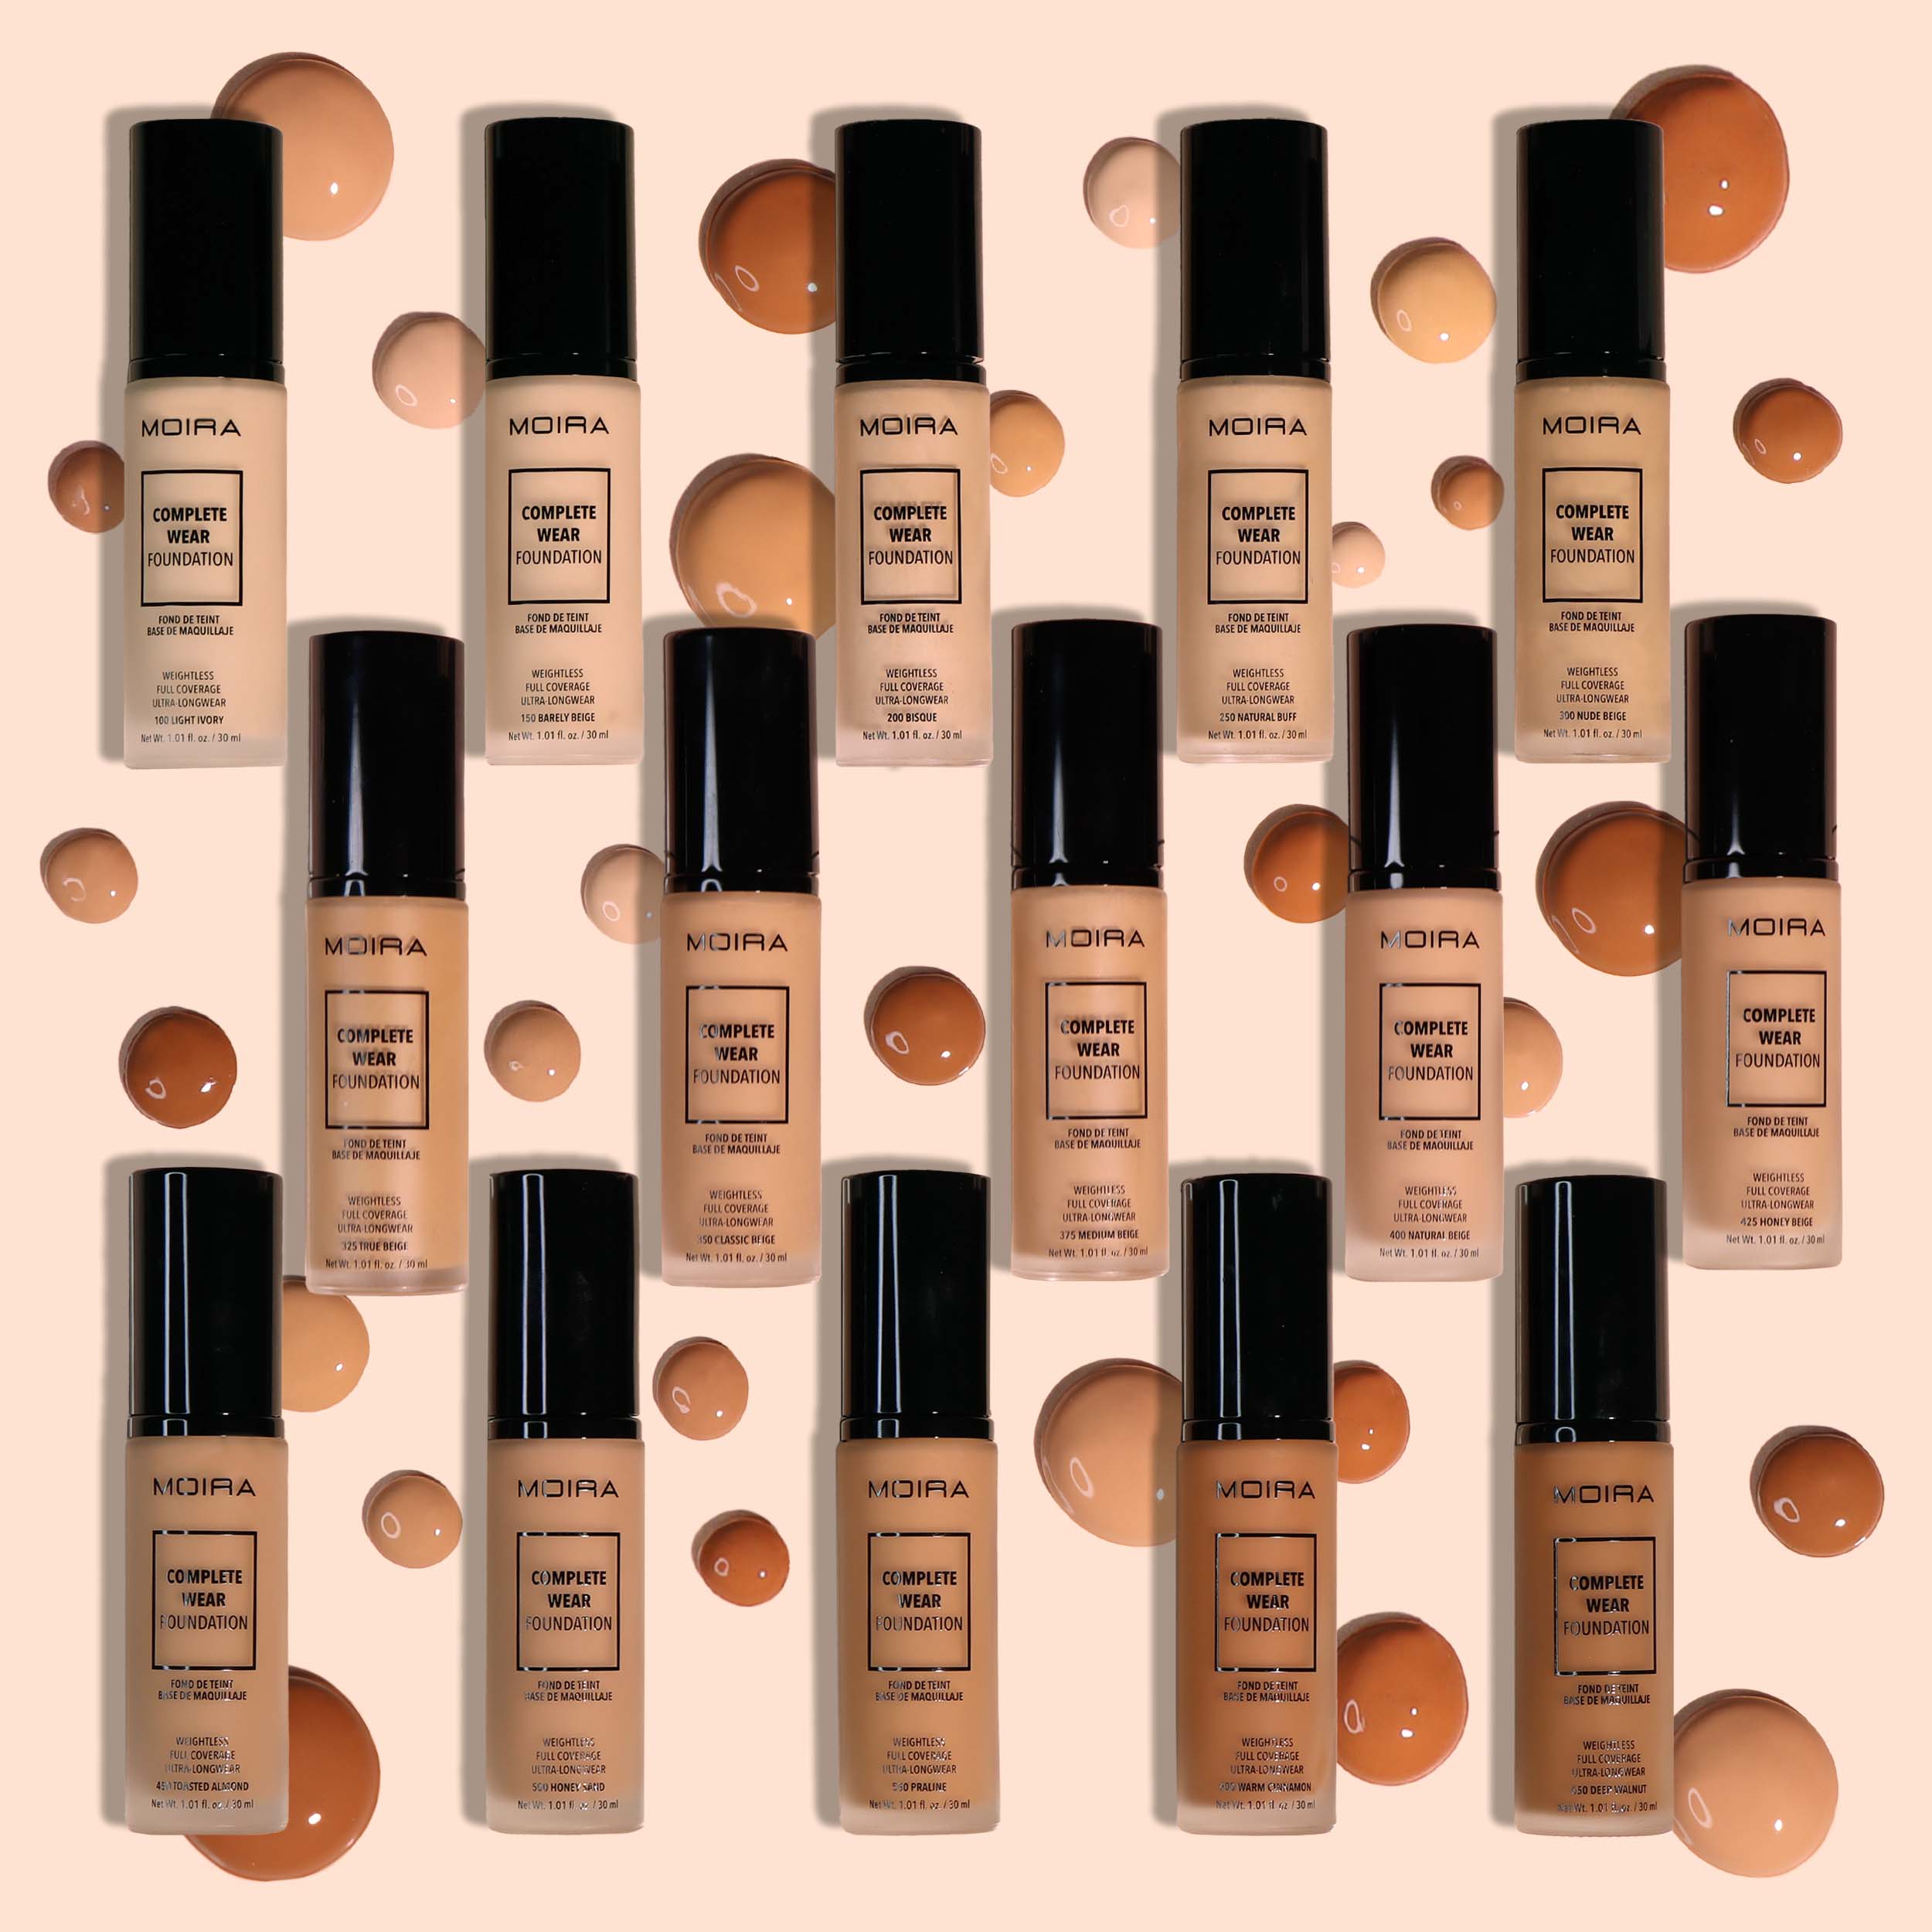 Complete Wear™ Foundation (450, Toasted Almond)